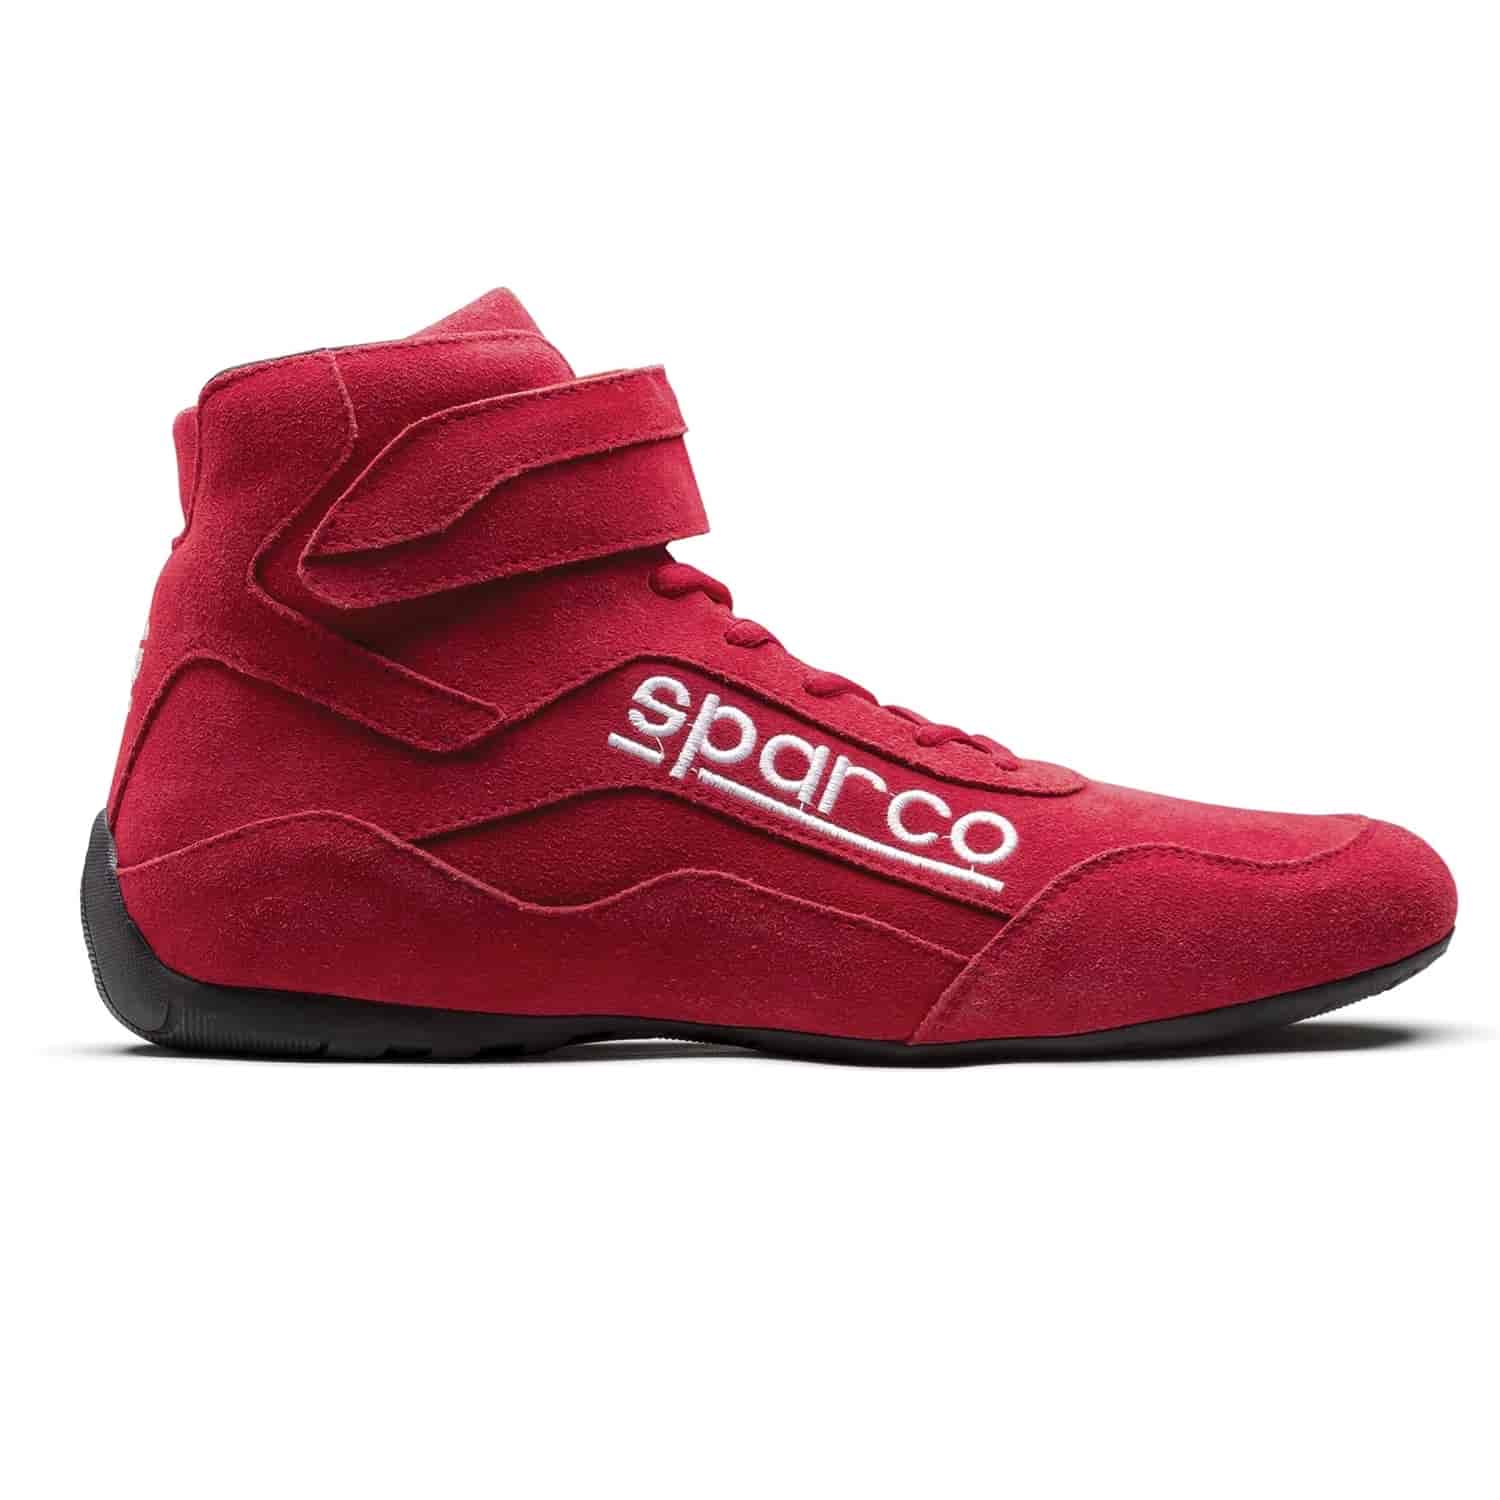 Race 2 Shoe Size 7.5 - Red